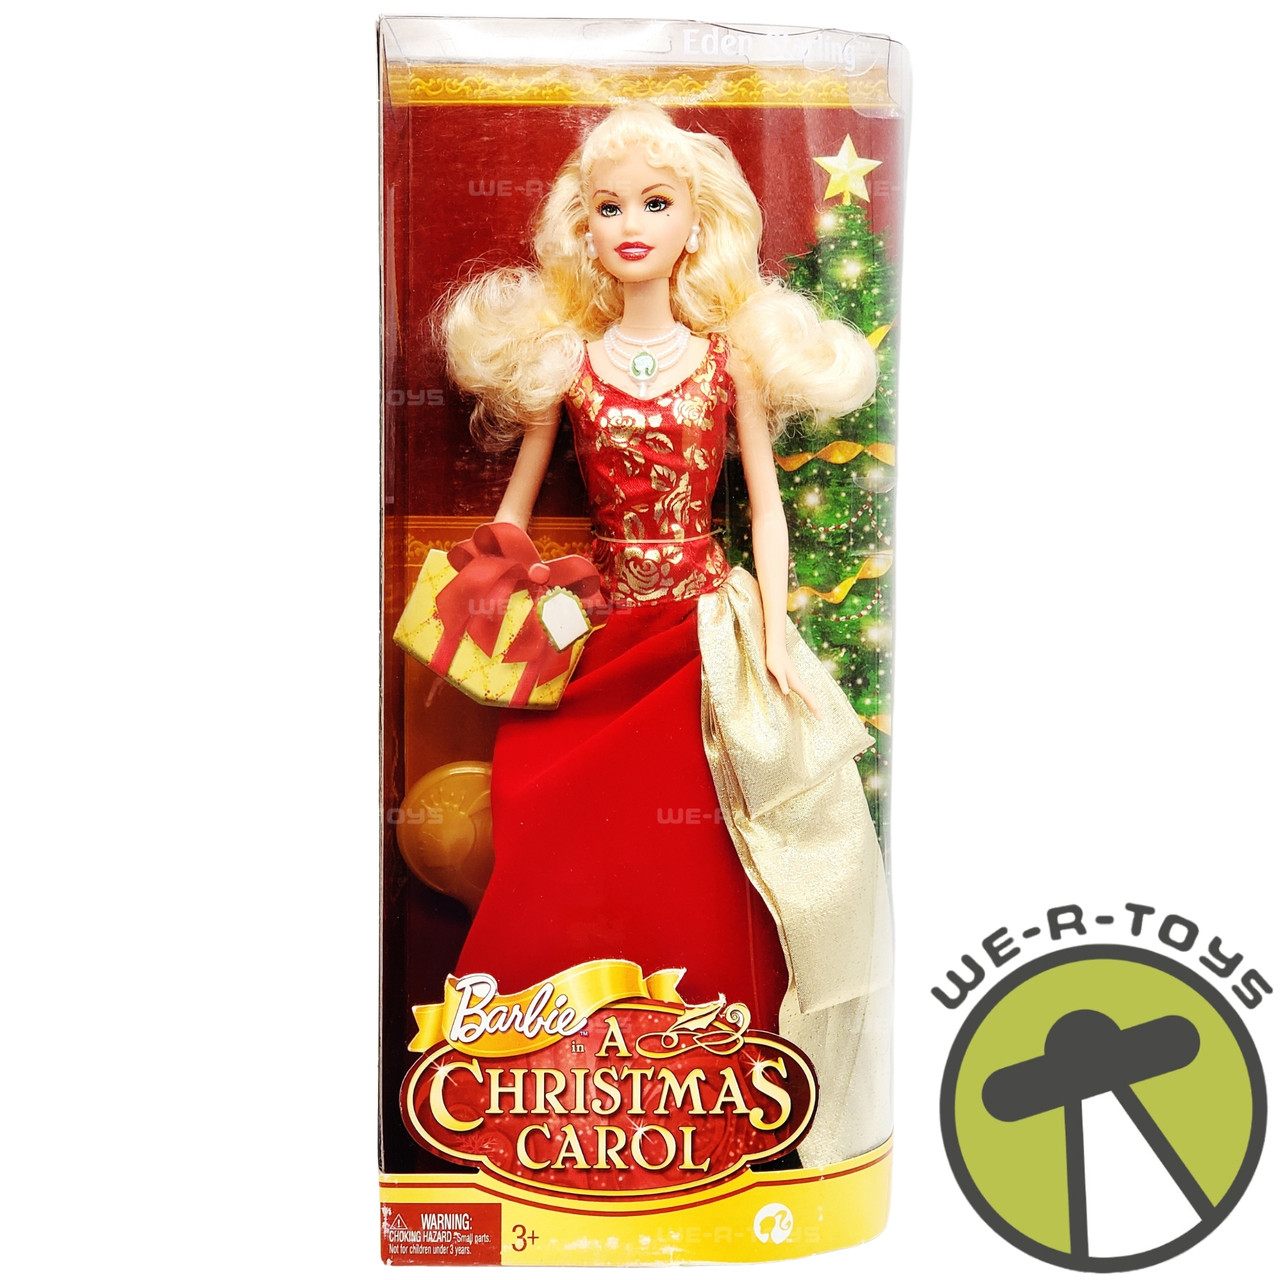 Barbie in A Christmas Carol as Eden Starling Doll Red Dress 2008 Mattel  P8734